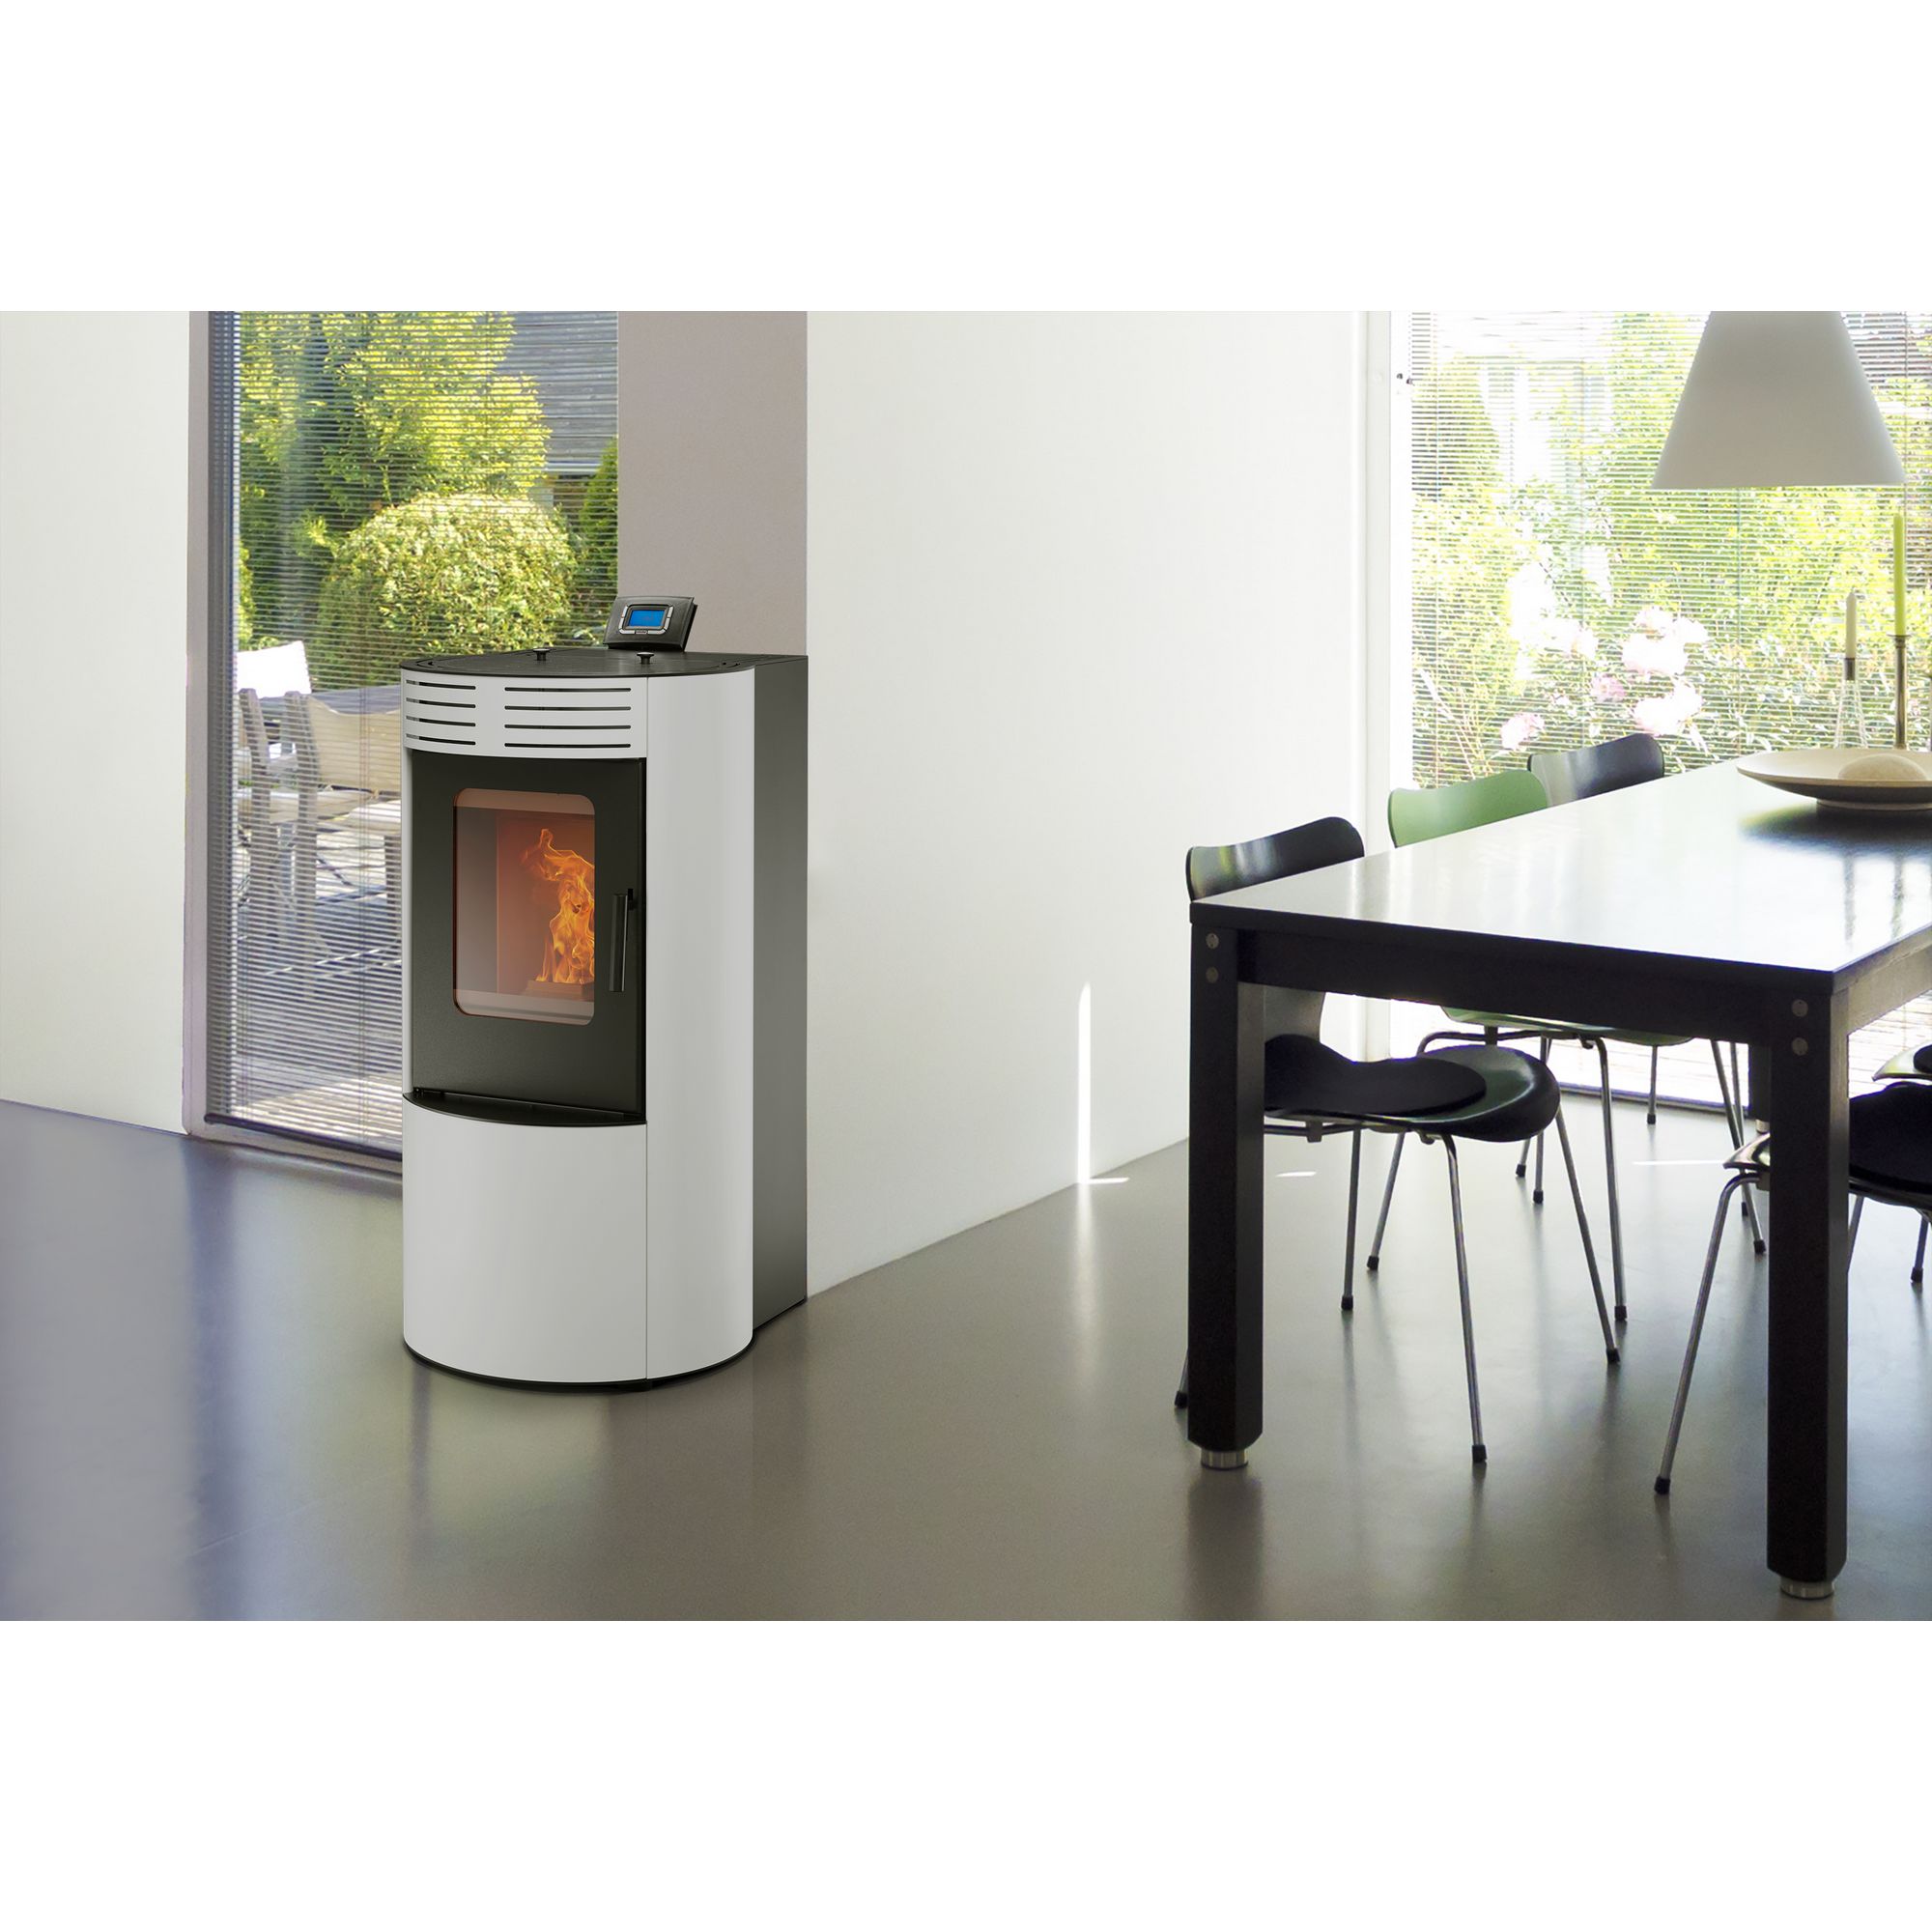 Pelletofen 'Ovale Smart' Stahl 9 kW + product picture